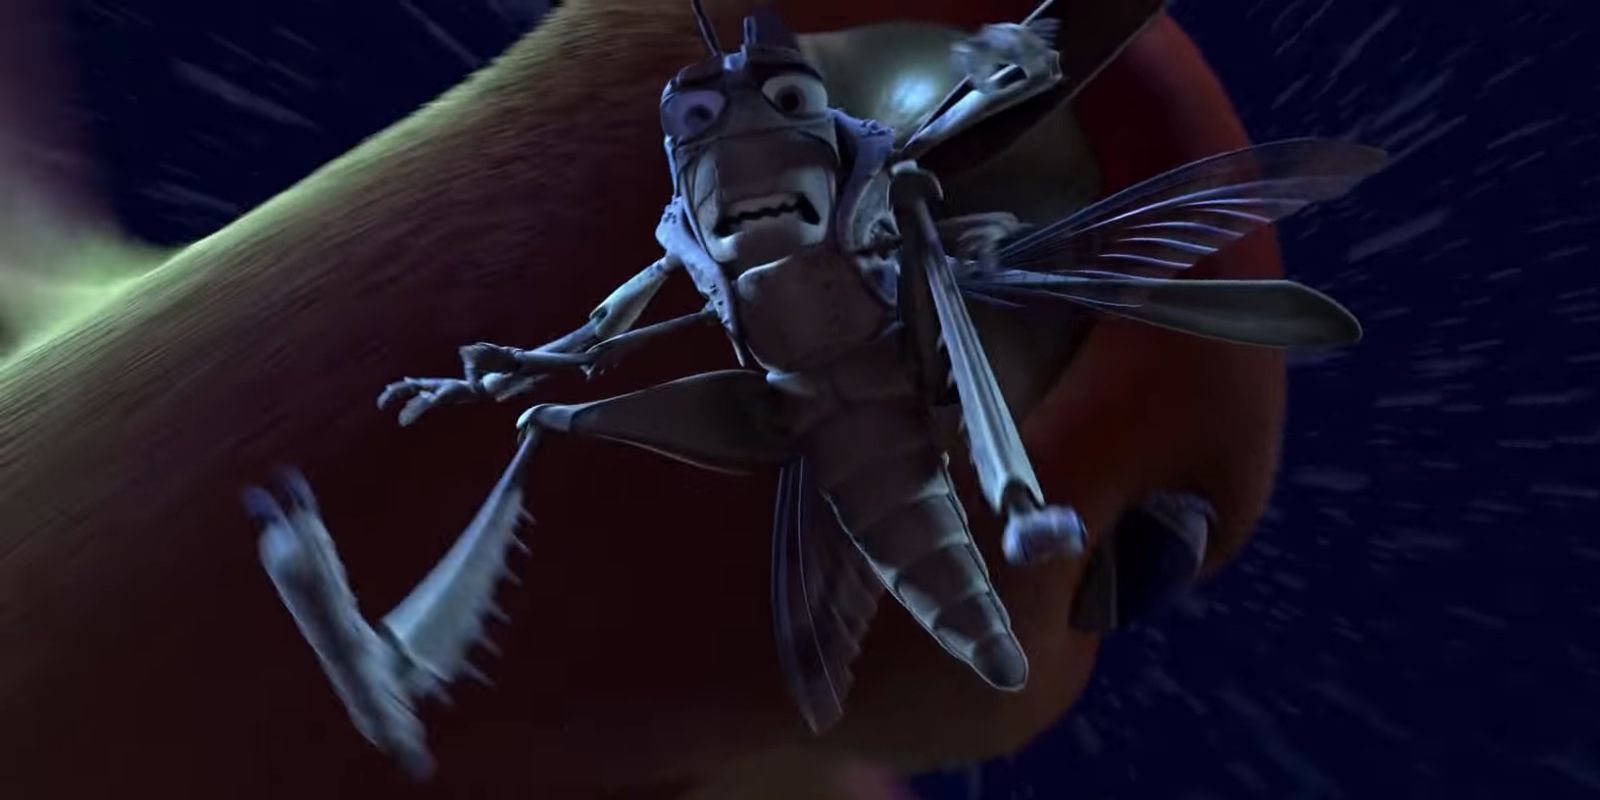 Hopper being fed to the baby birds in A Bug's Life